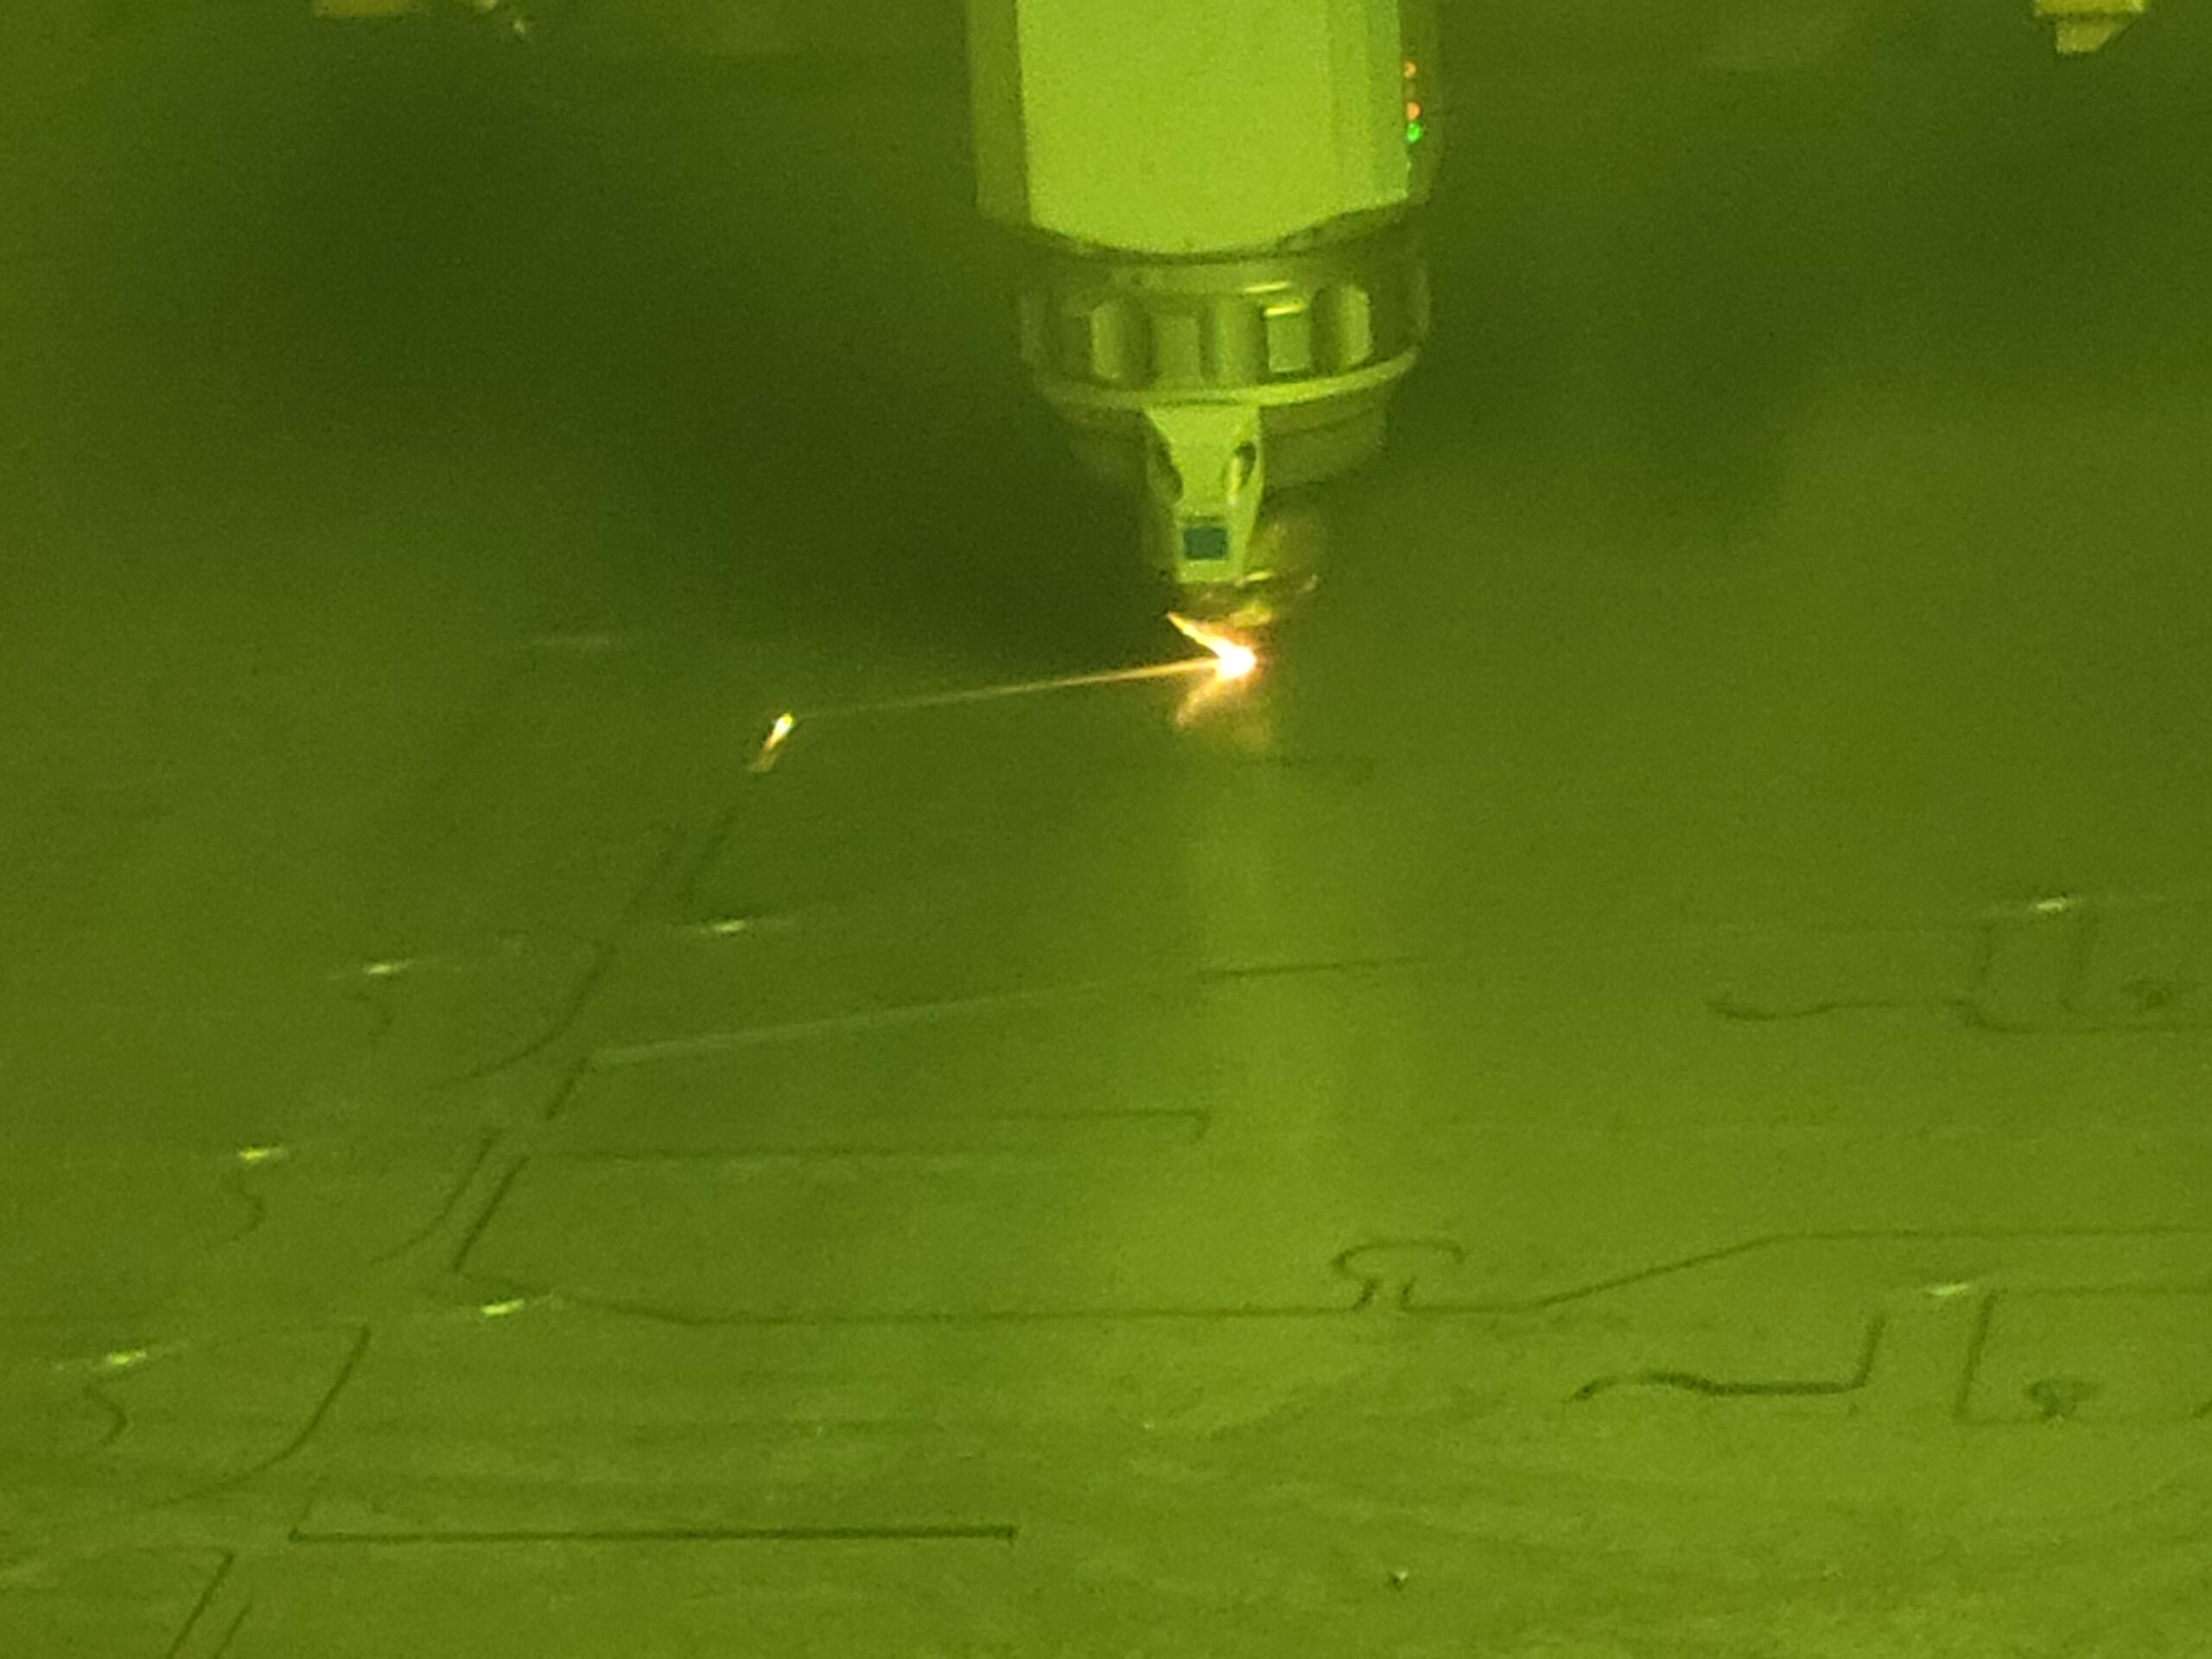 A laser cutting into a sheet of metal